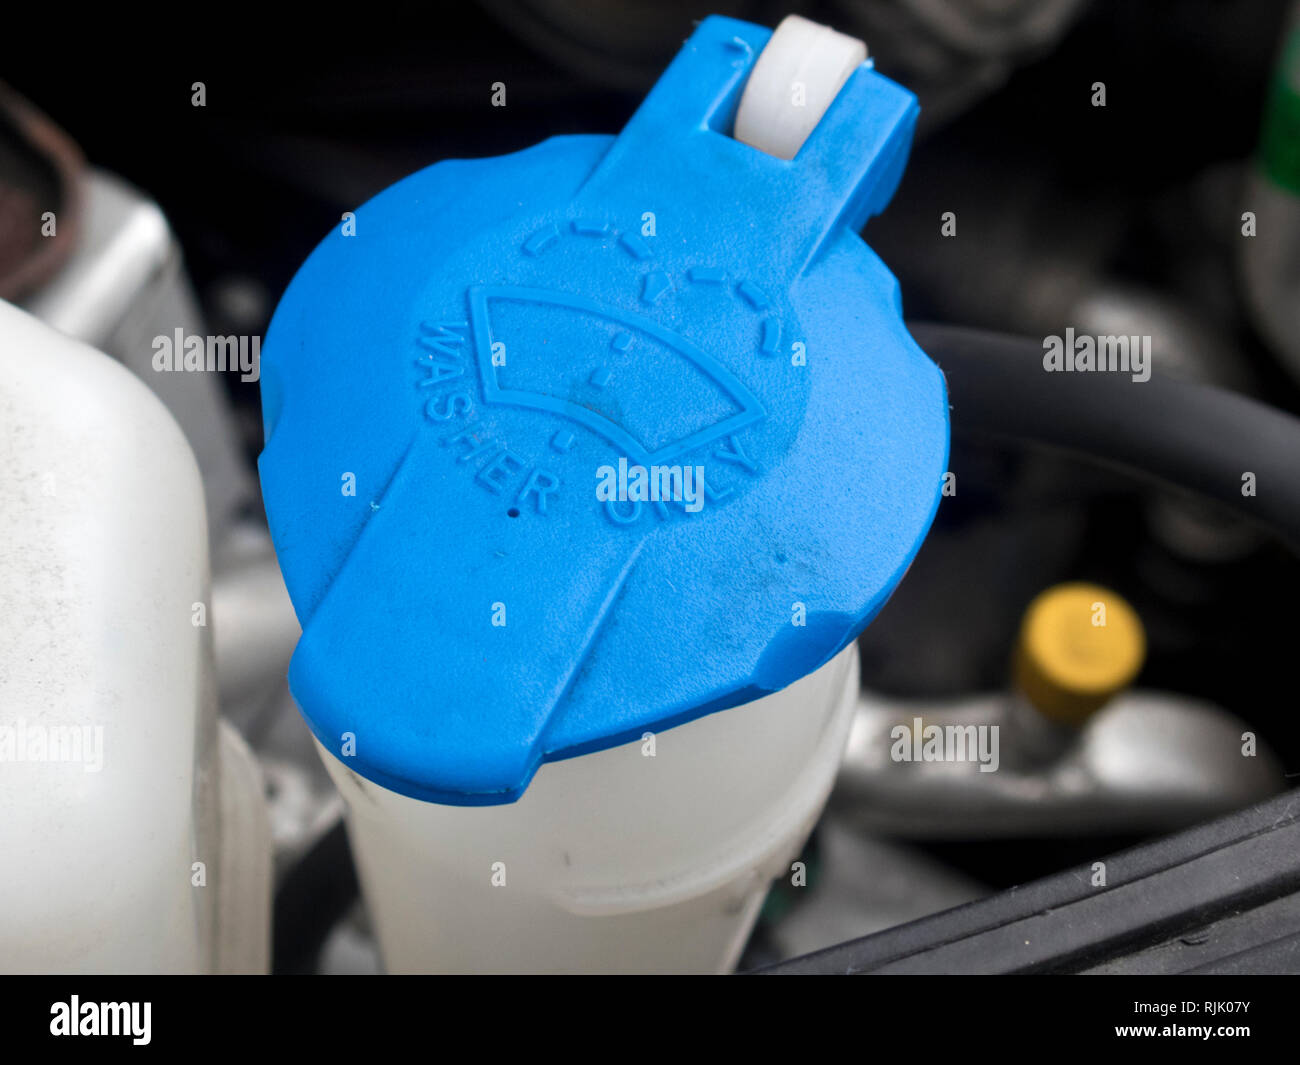 Automotive Reservoir Bottle for Screen Wash or Washer Bottle Stock Photo -  Alamy